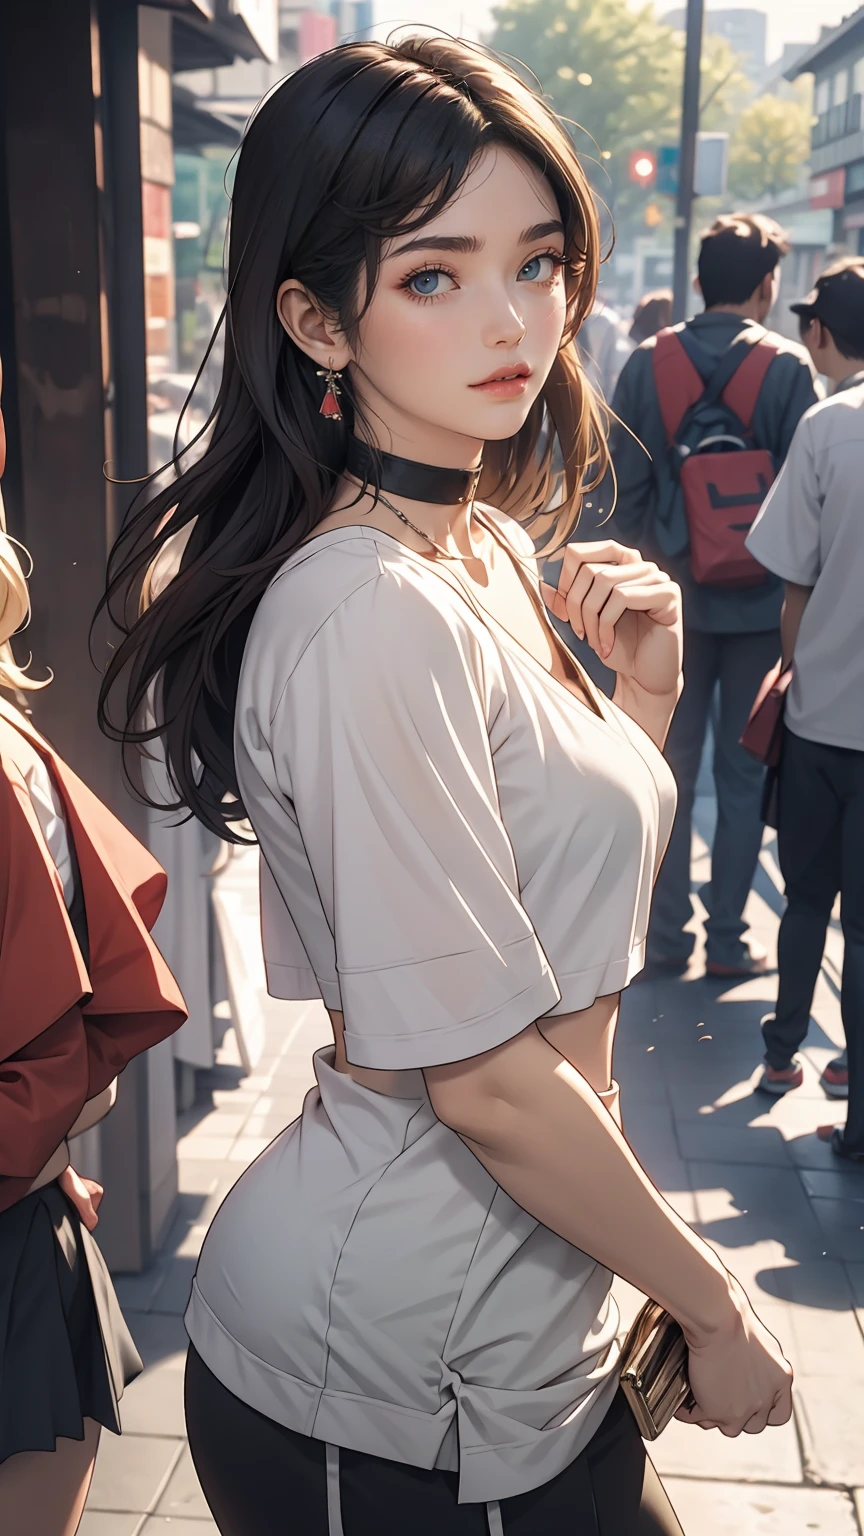 24-year-old female、Put your hands together and thrust them forward、Many pigeons land on my hands、Choker Neck((choker neck))Wear tops、Wear low rise leggings、smile、View your viewers、smile